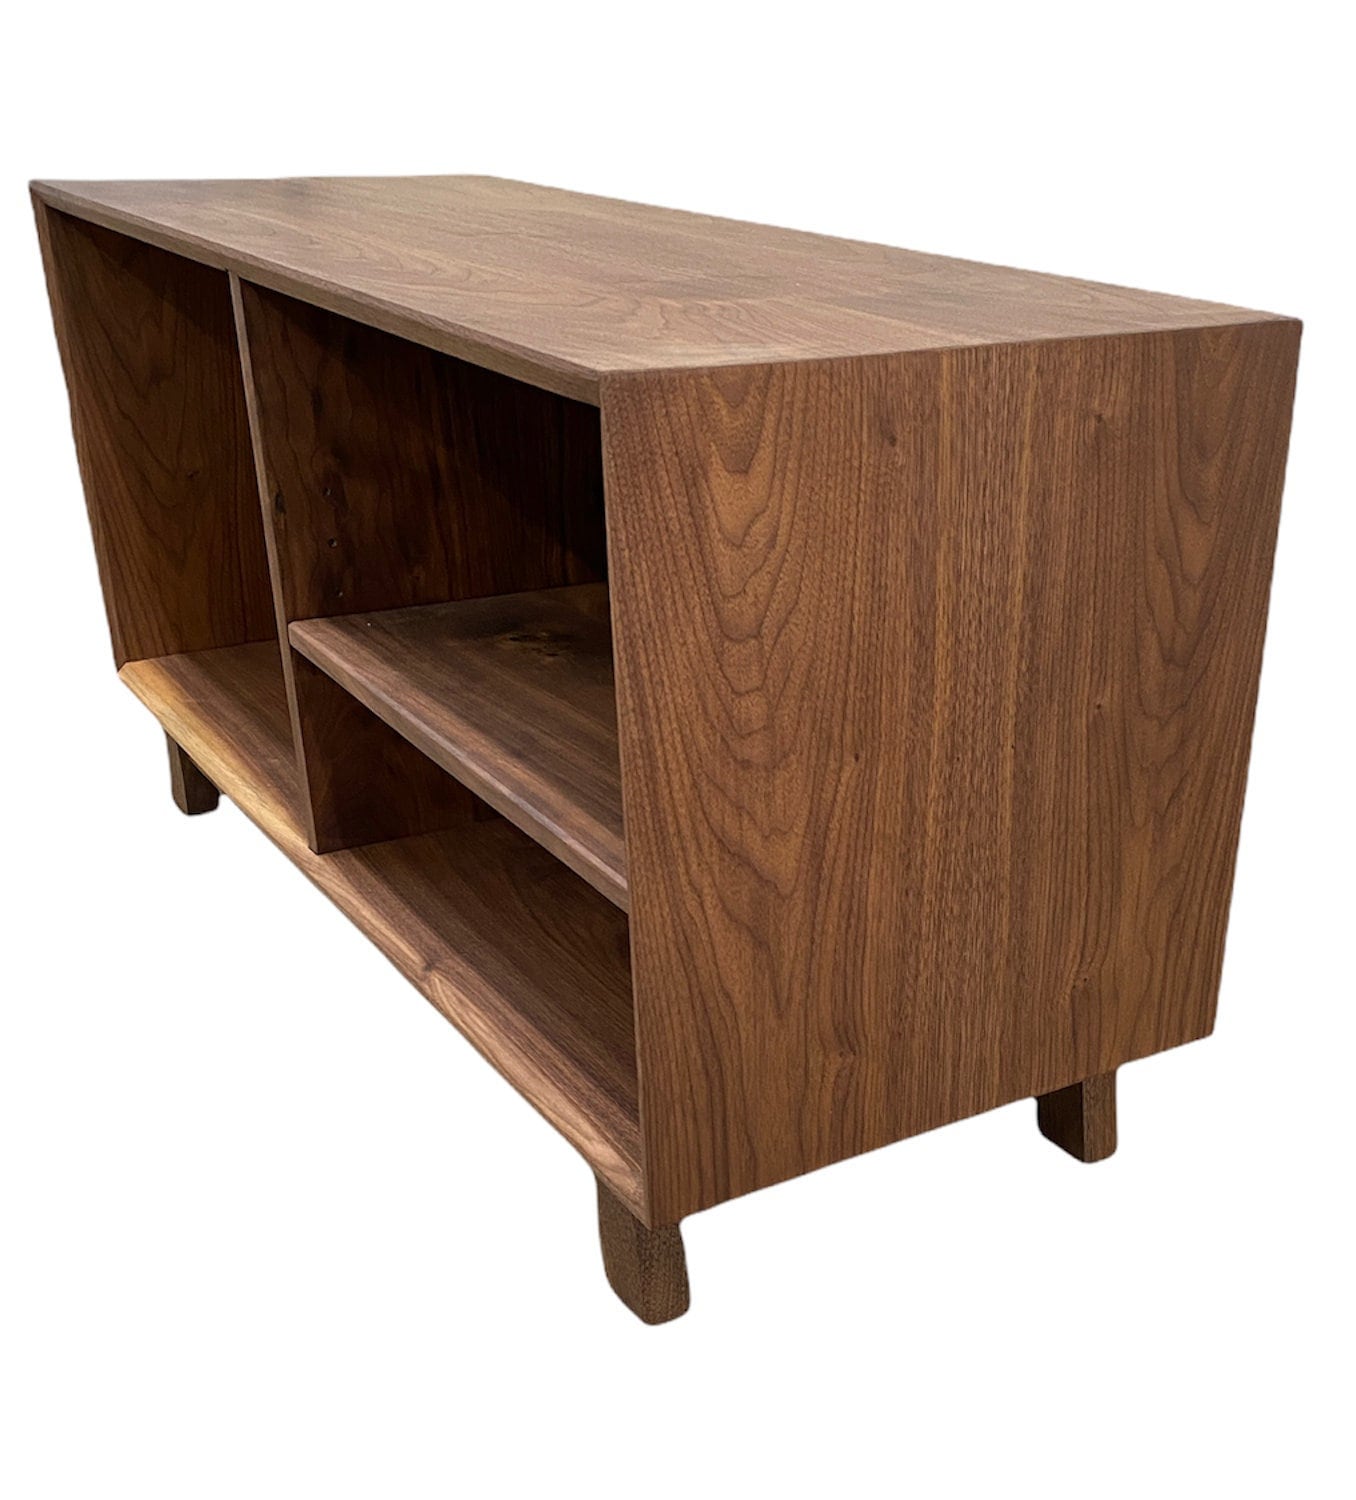 Small TV Stand, Media Stand in Solid Oak With Soft Closing Doors